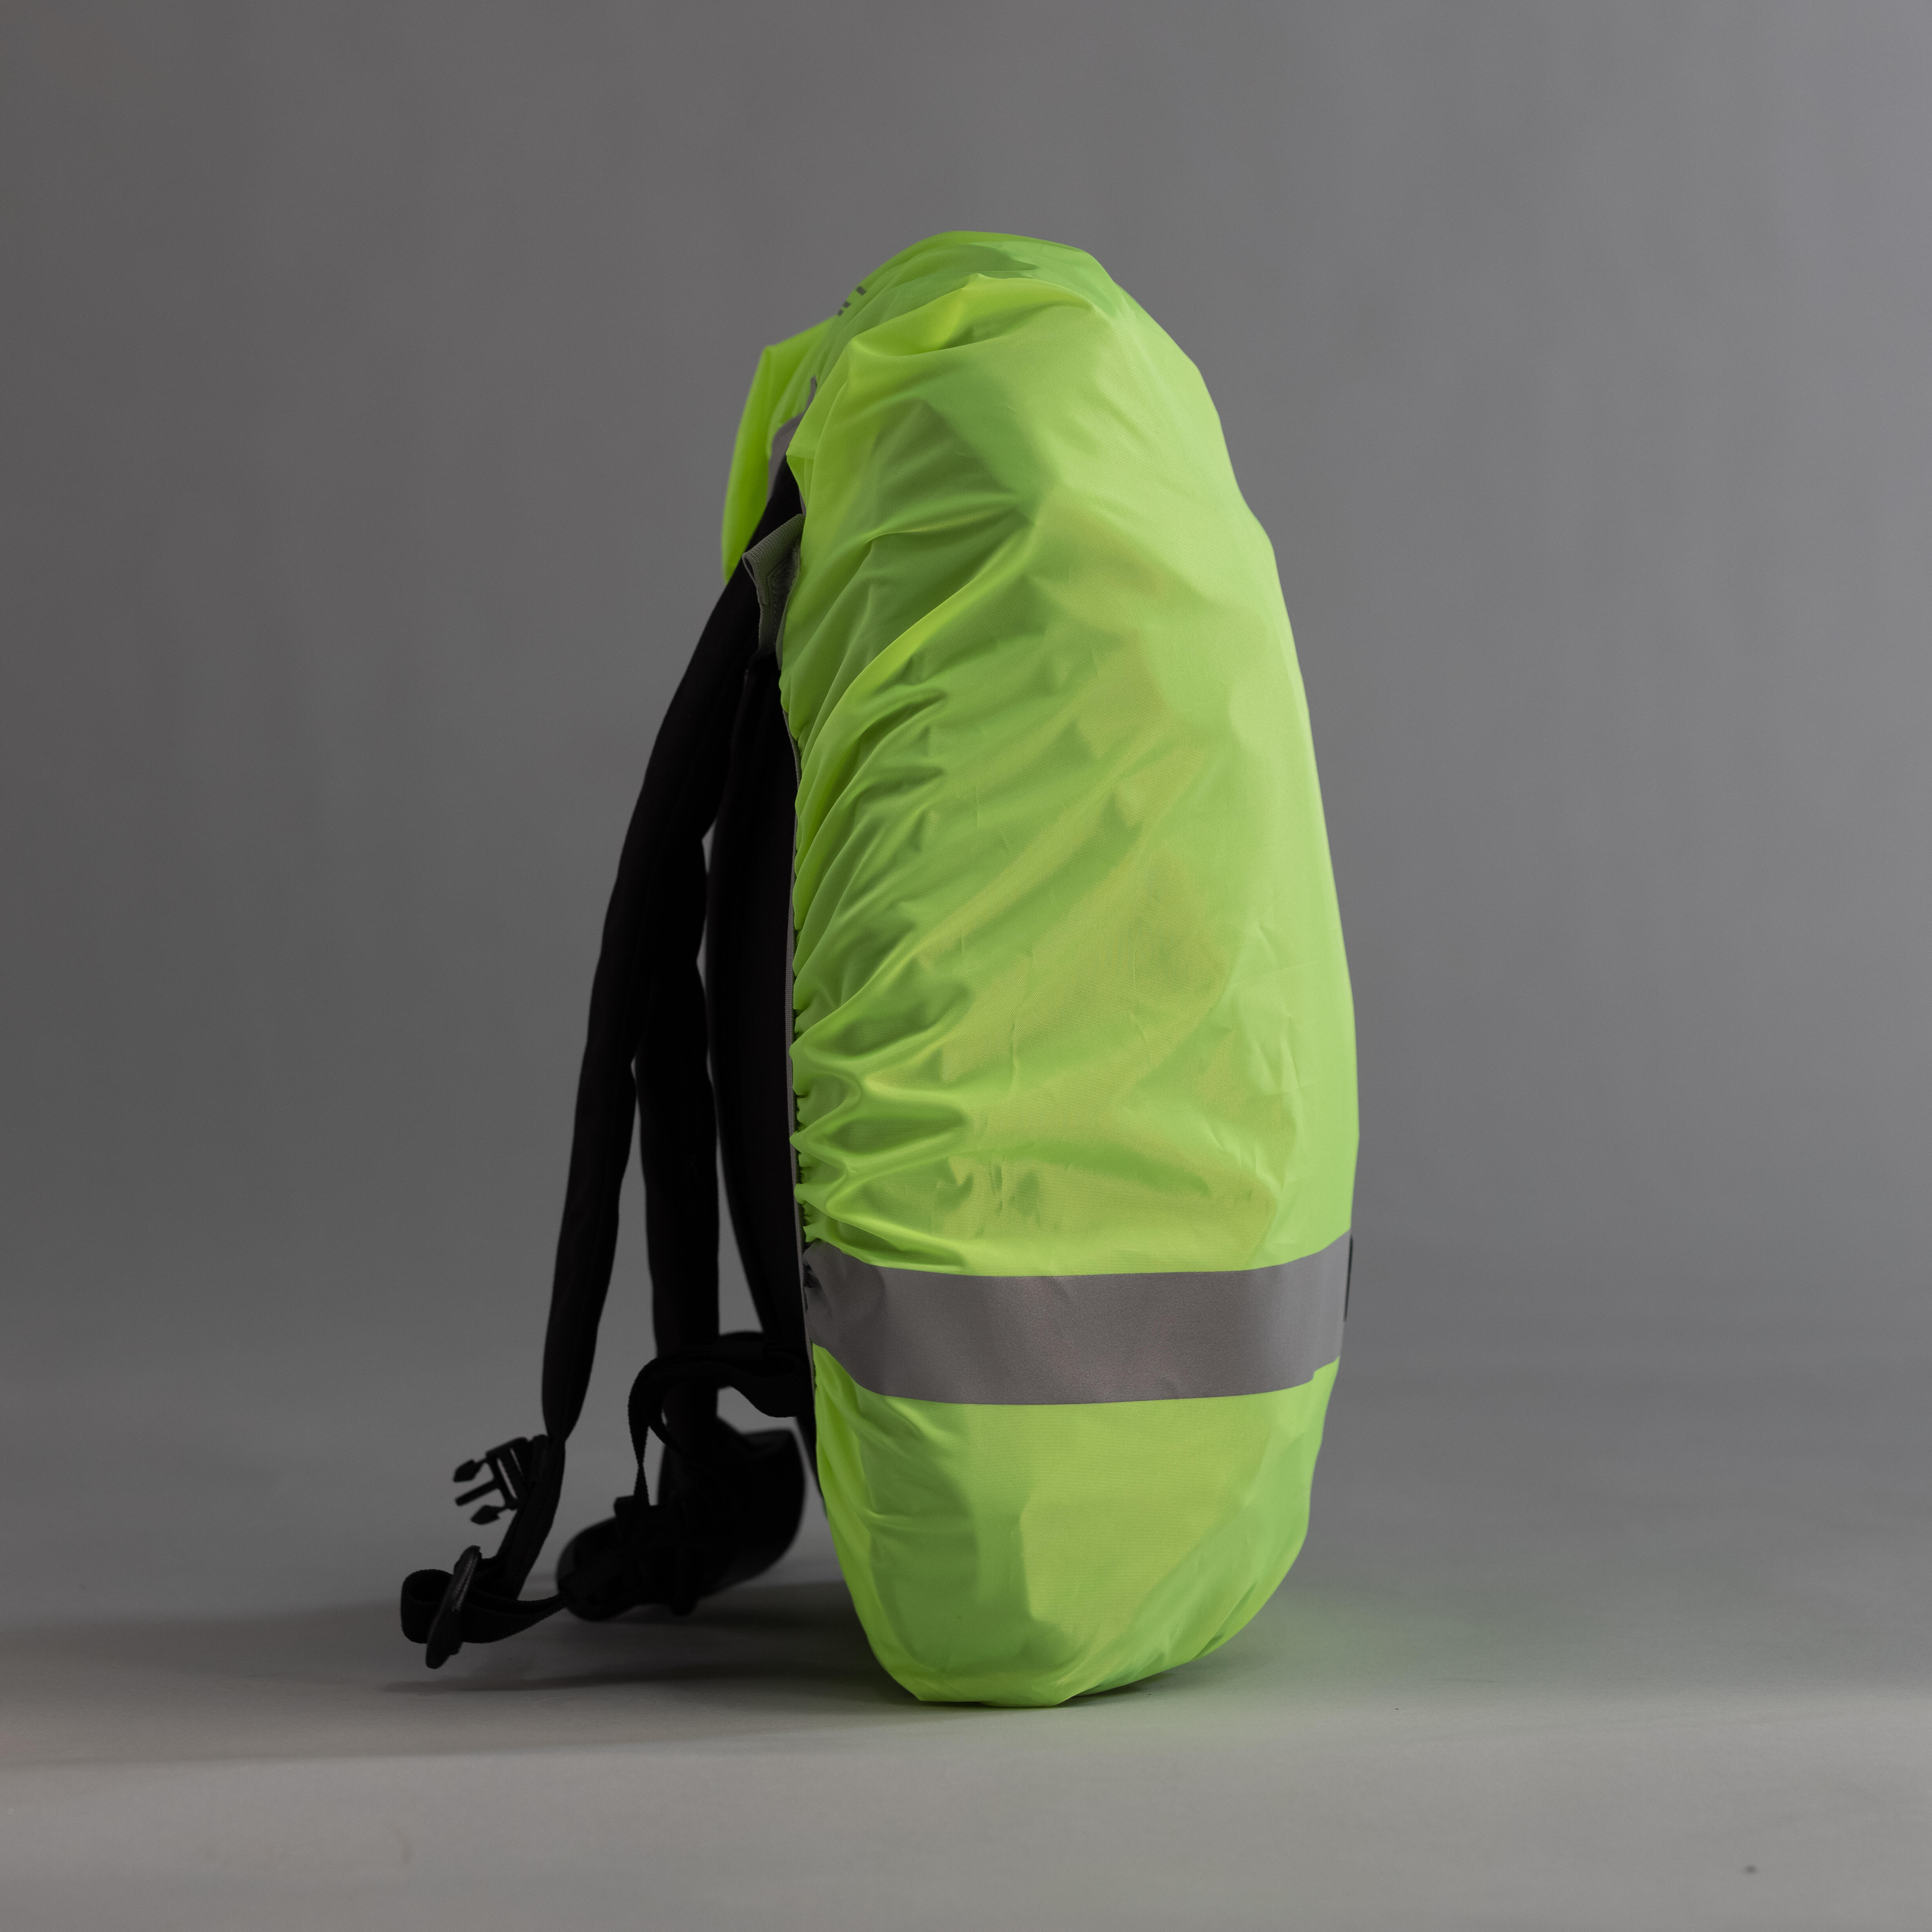 Waterproof High Visibility Bag Cover - Neon Yellow - BTWIN